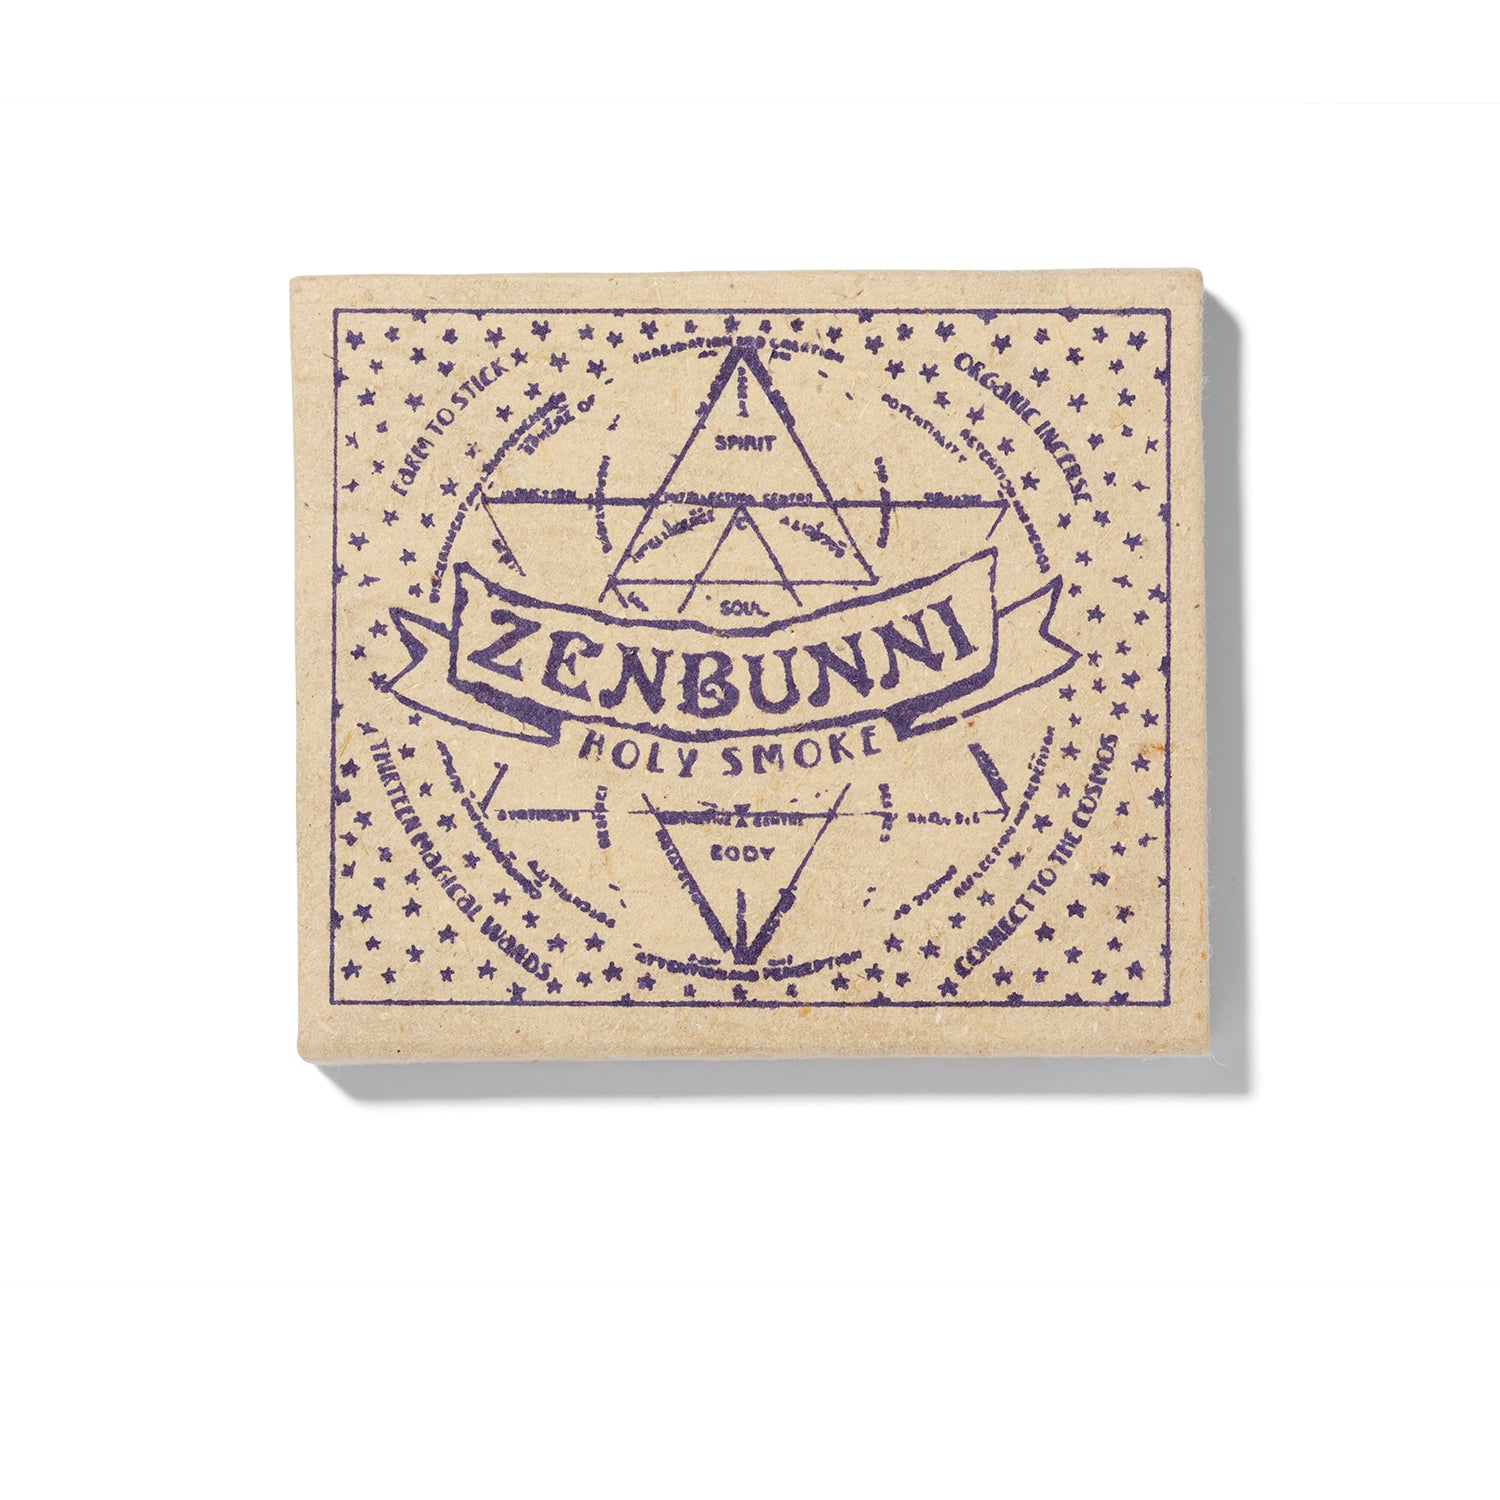 The box for the Zen Bunni Holy Smoke Incense is cream colored cardboard with purple screen printing on the cover. 